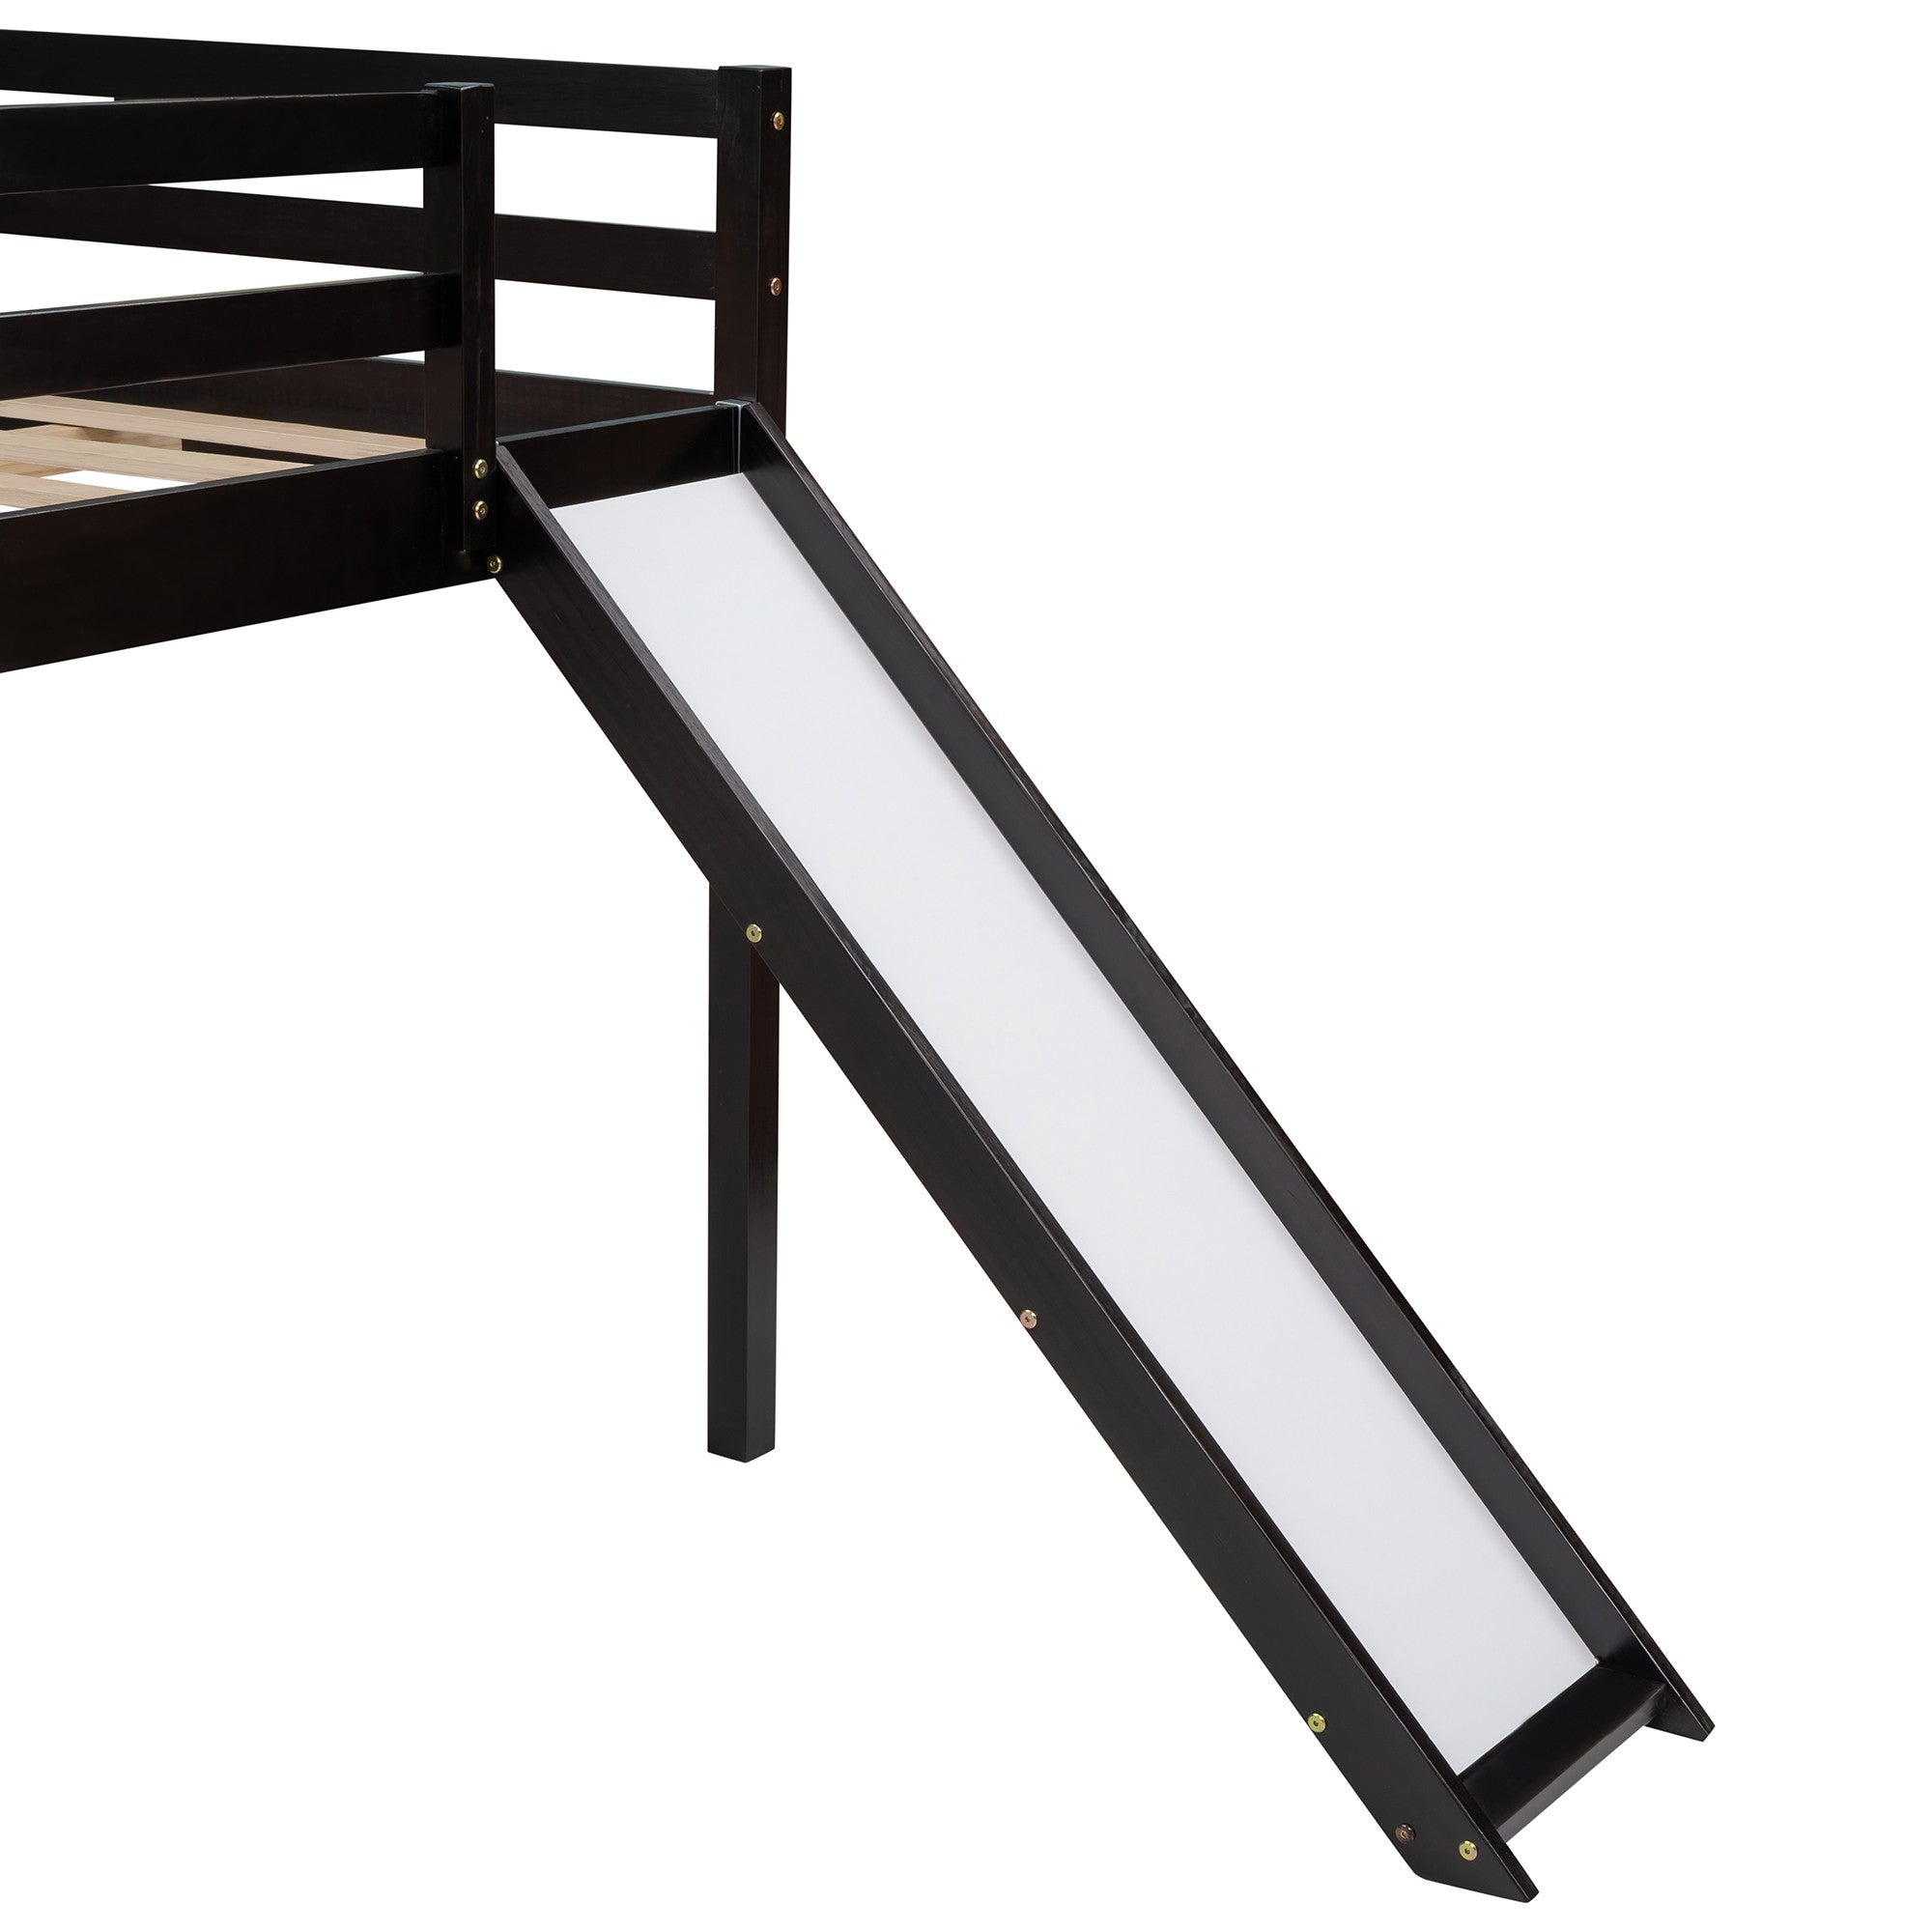 Espresso L Shaped Double Loft Bed With Slide And Ladders